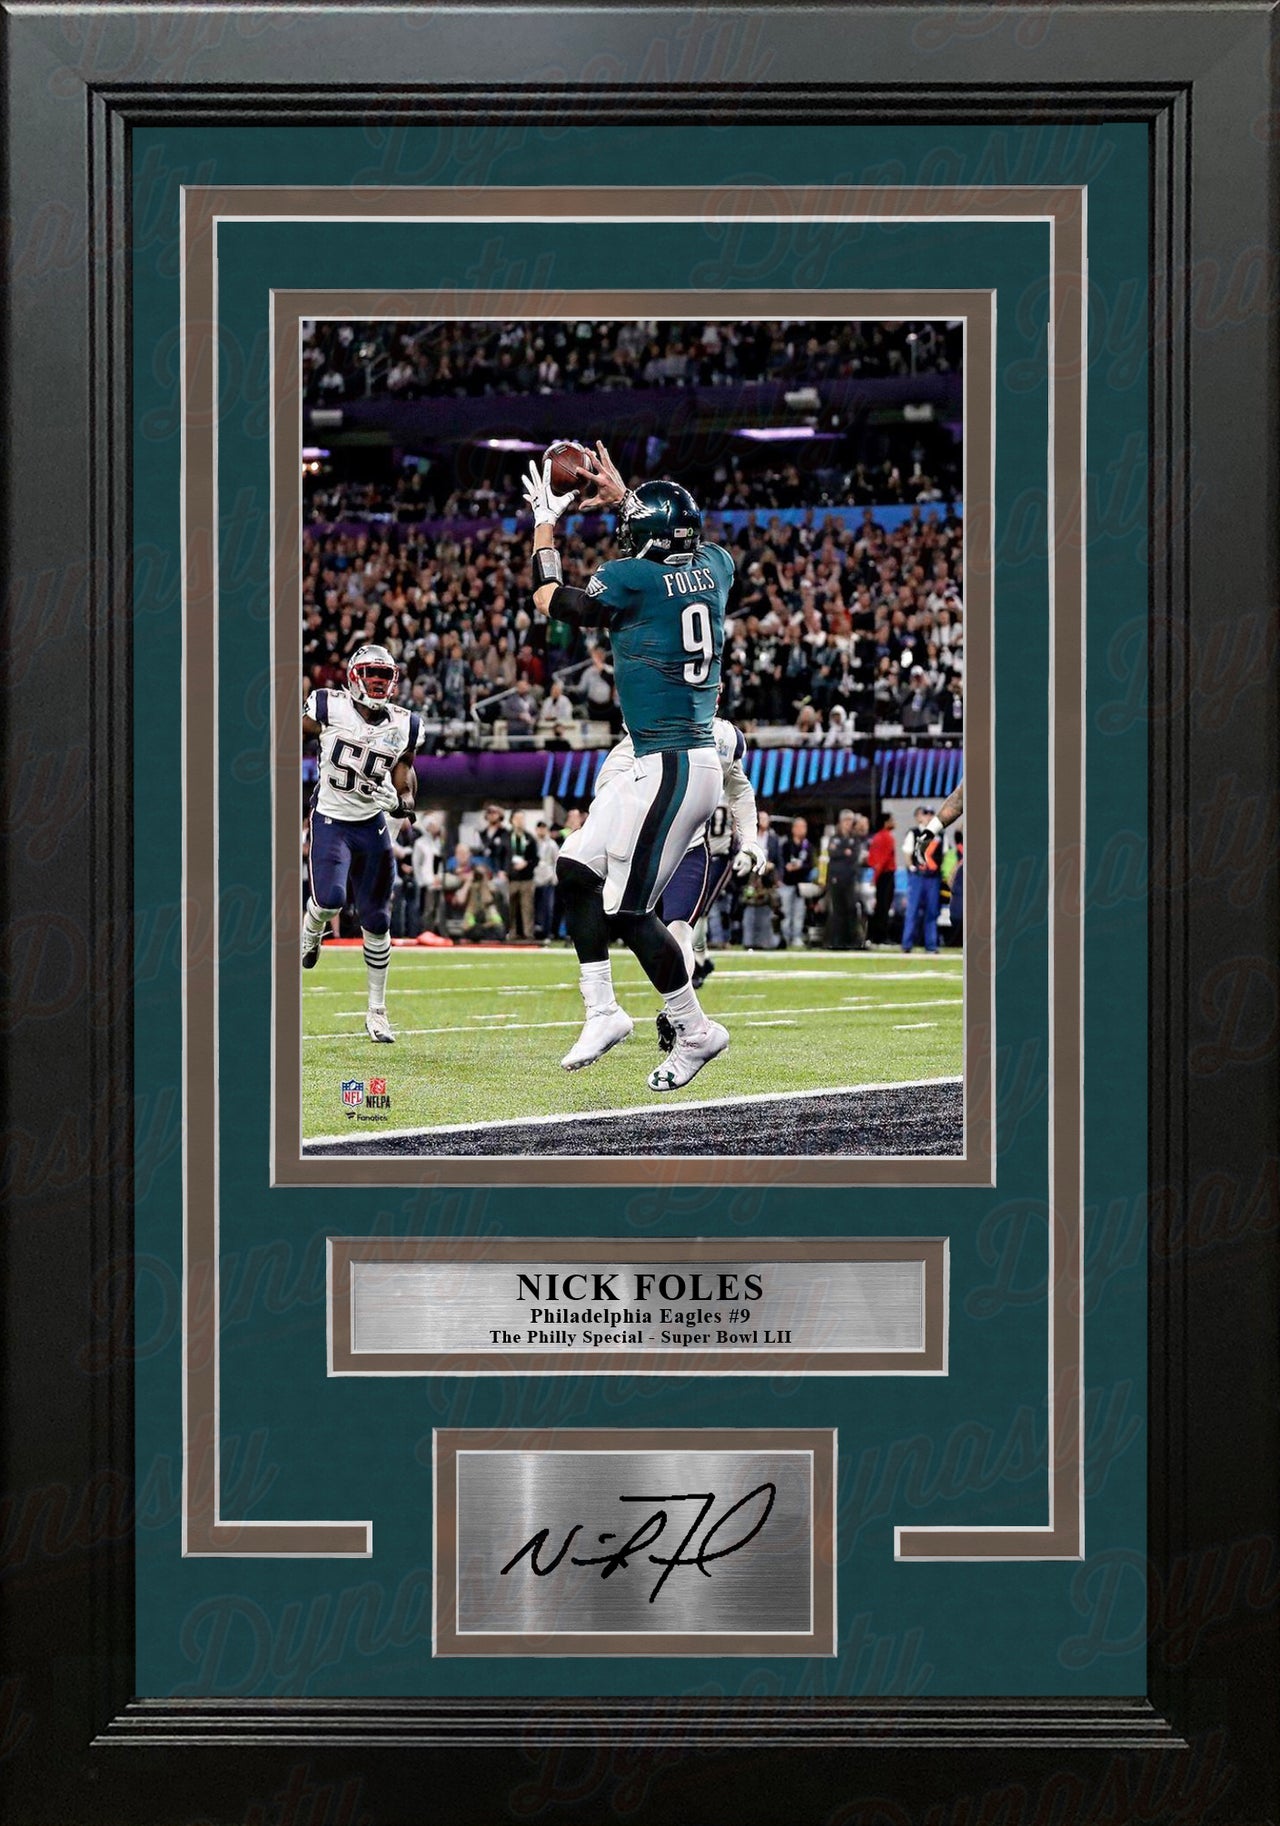 Nick Foles Philadelphia Eagles Philly Special TD Catch 8x10 Framed Photo with Engraved Autograph - Dynasty Sports & Framing 